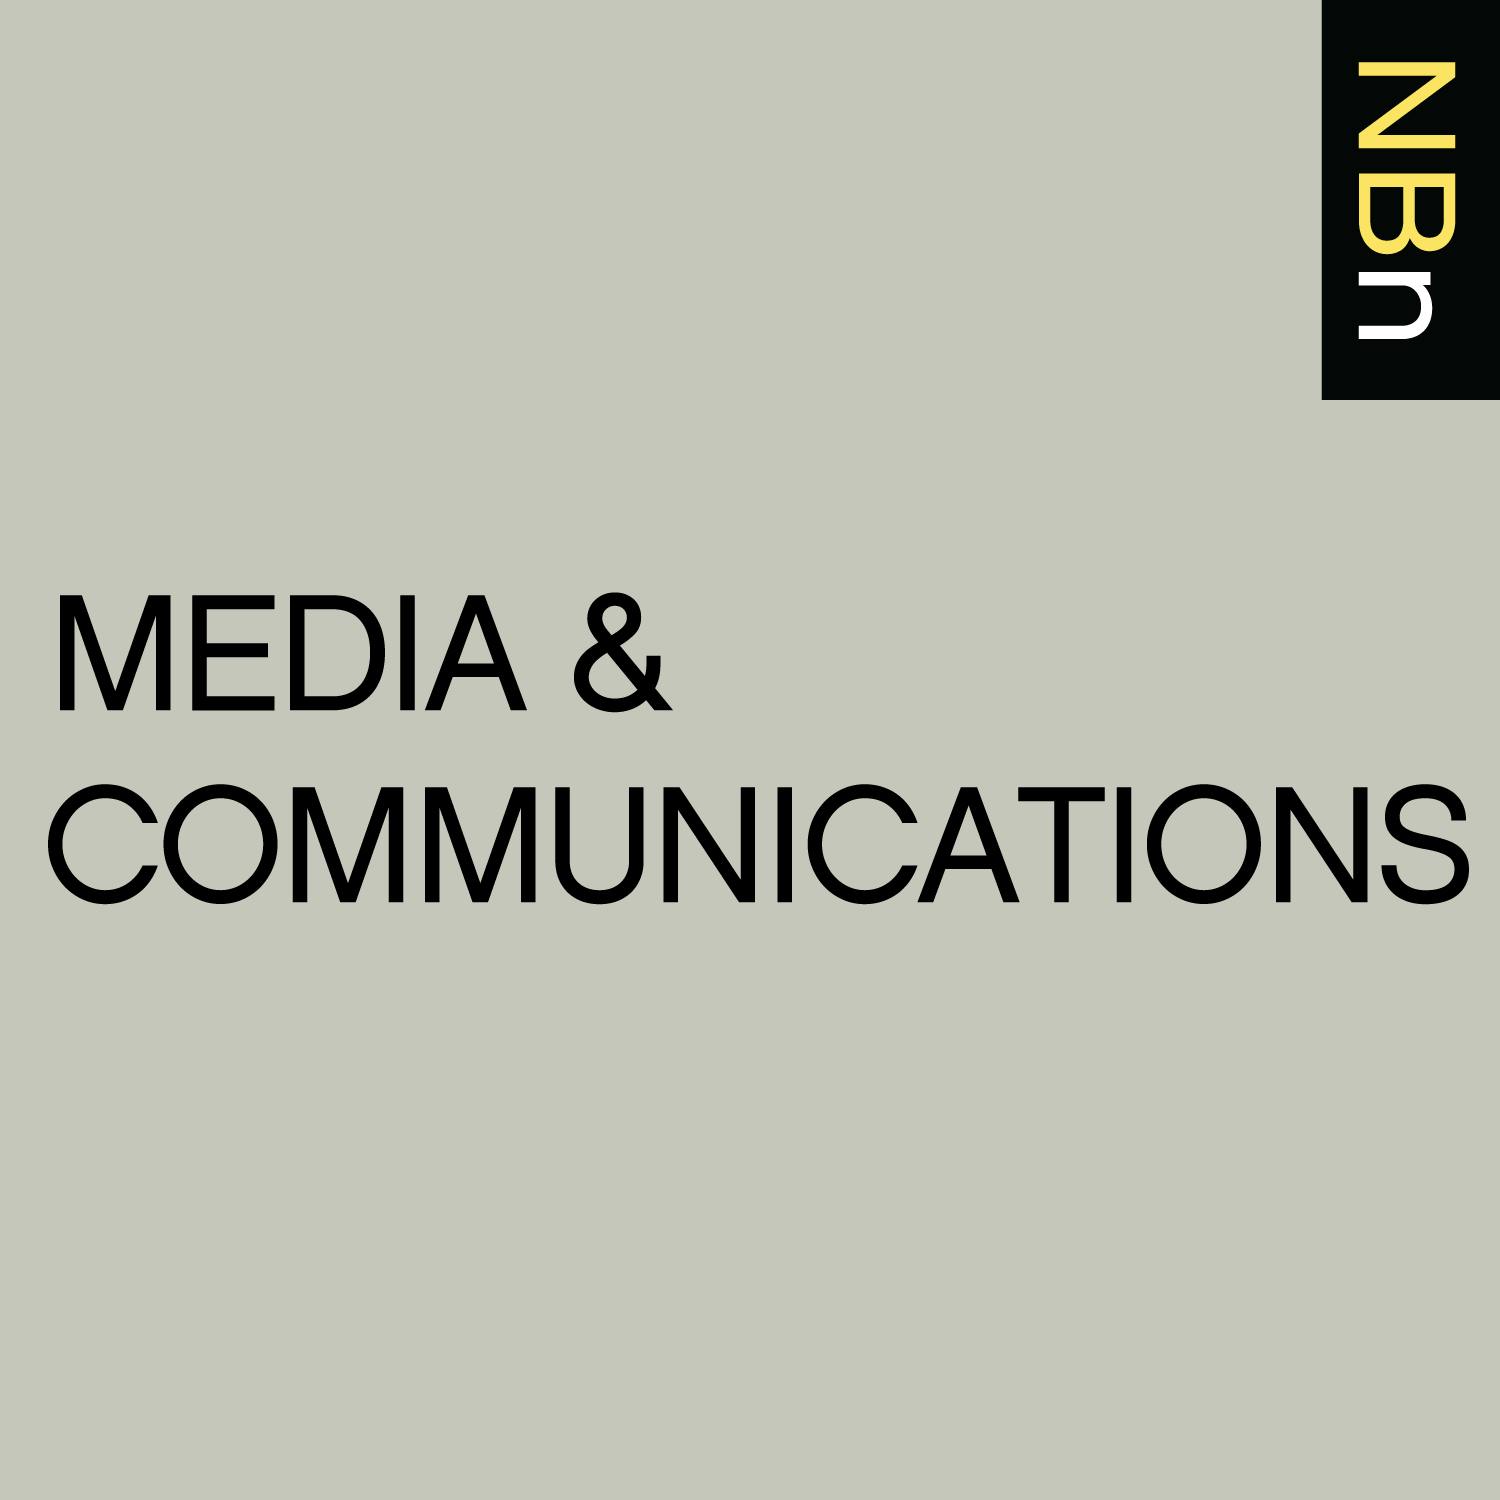 Premium Ad-Free: New Books in Communications podcast tile